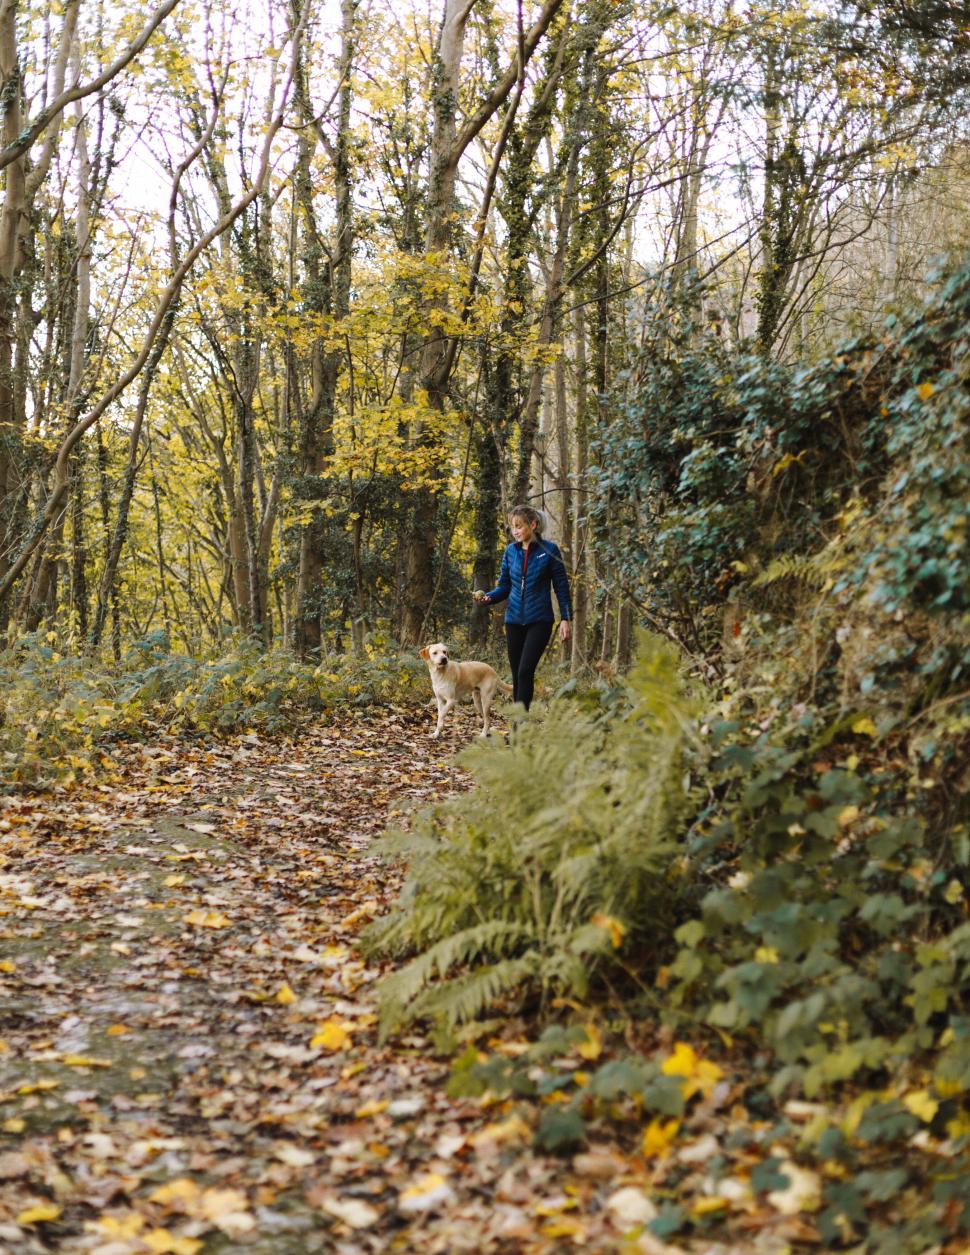 Free Image of Person and dog walking together on forest path 